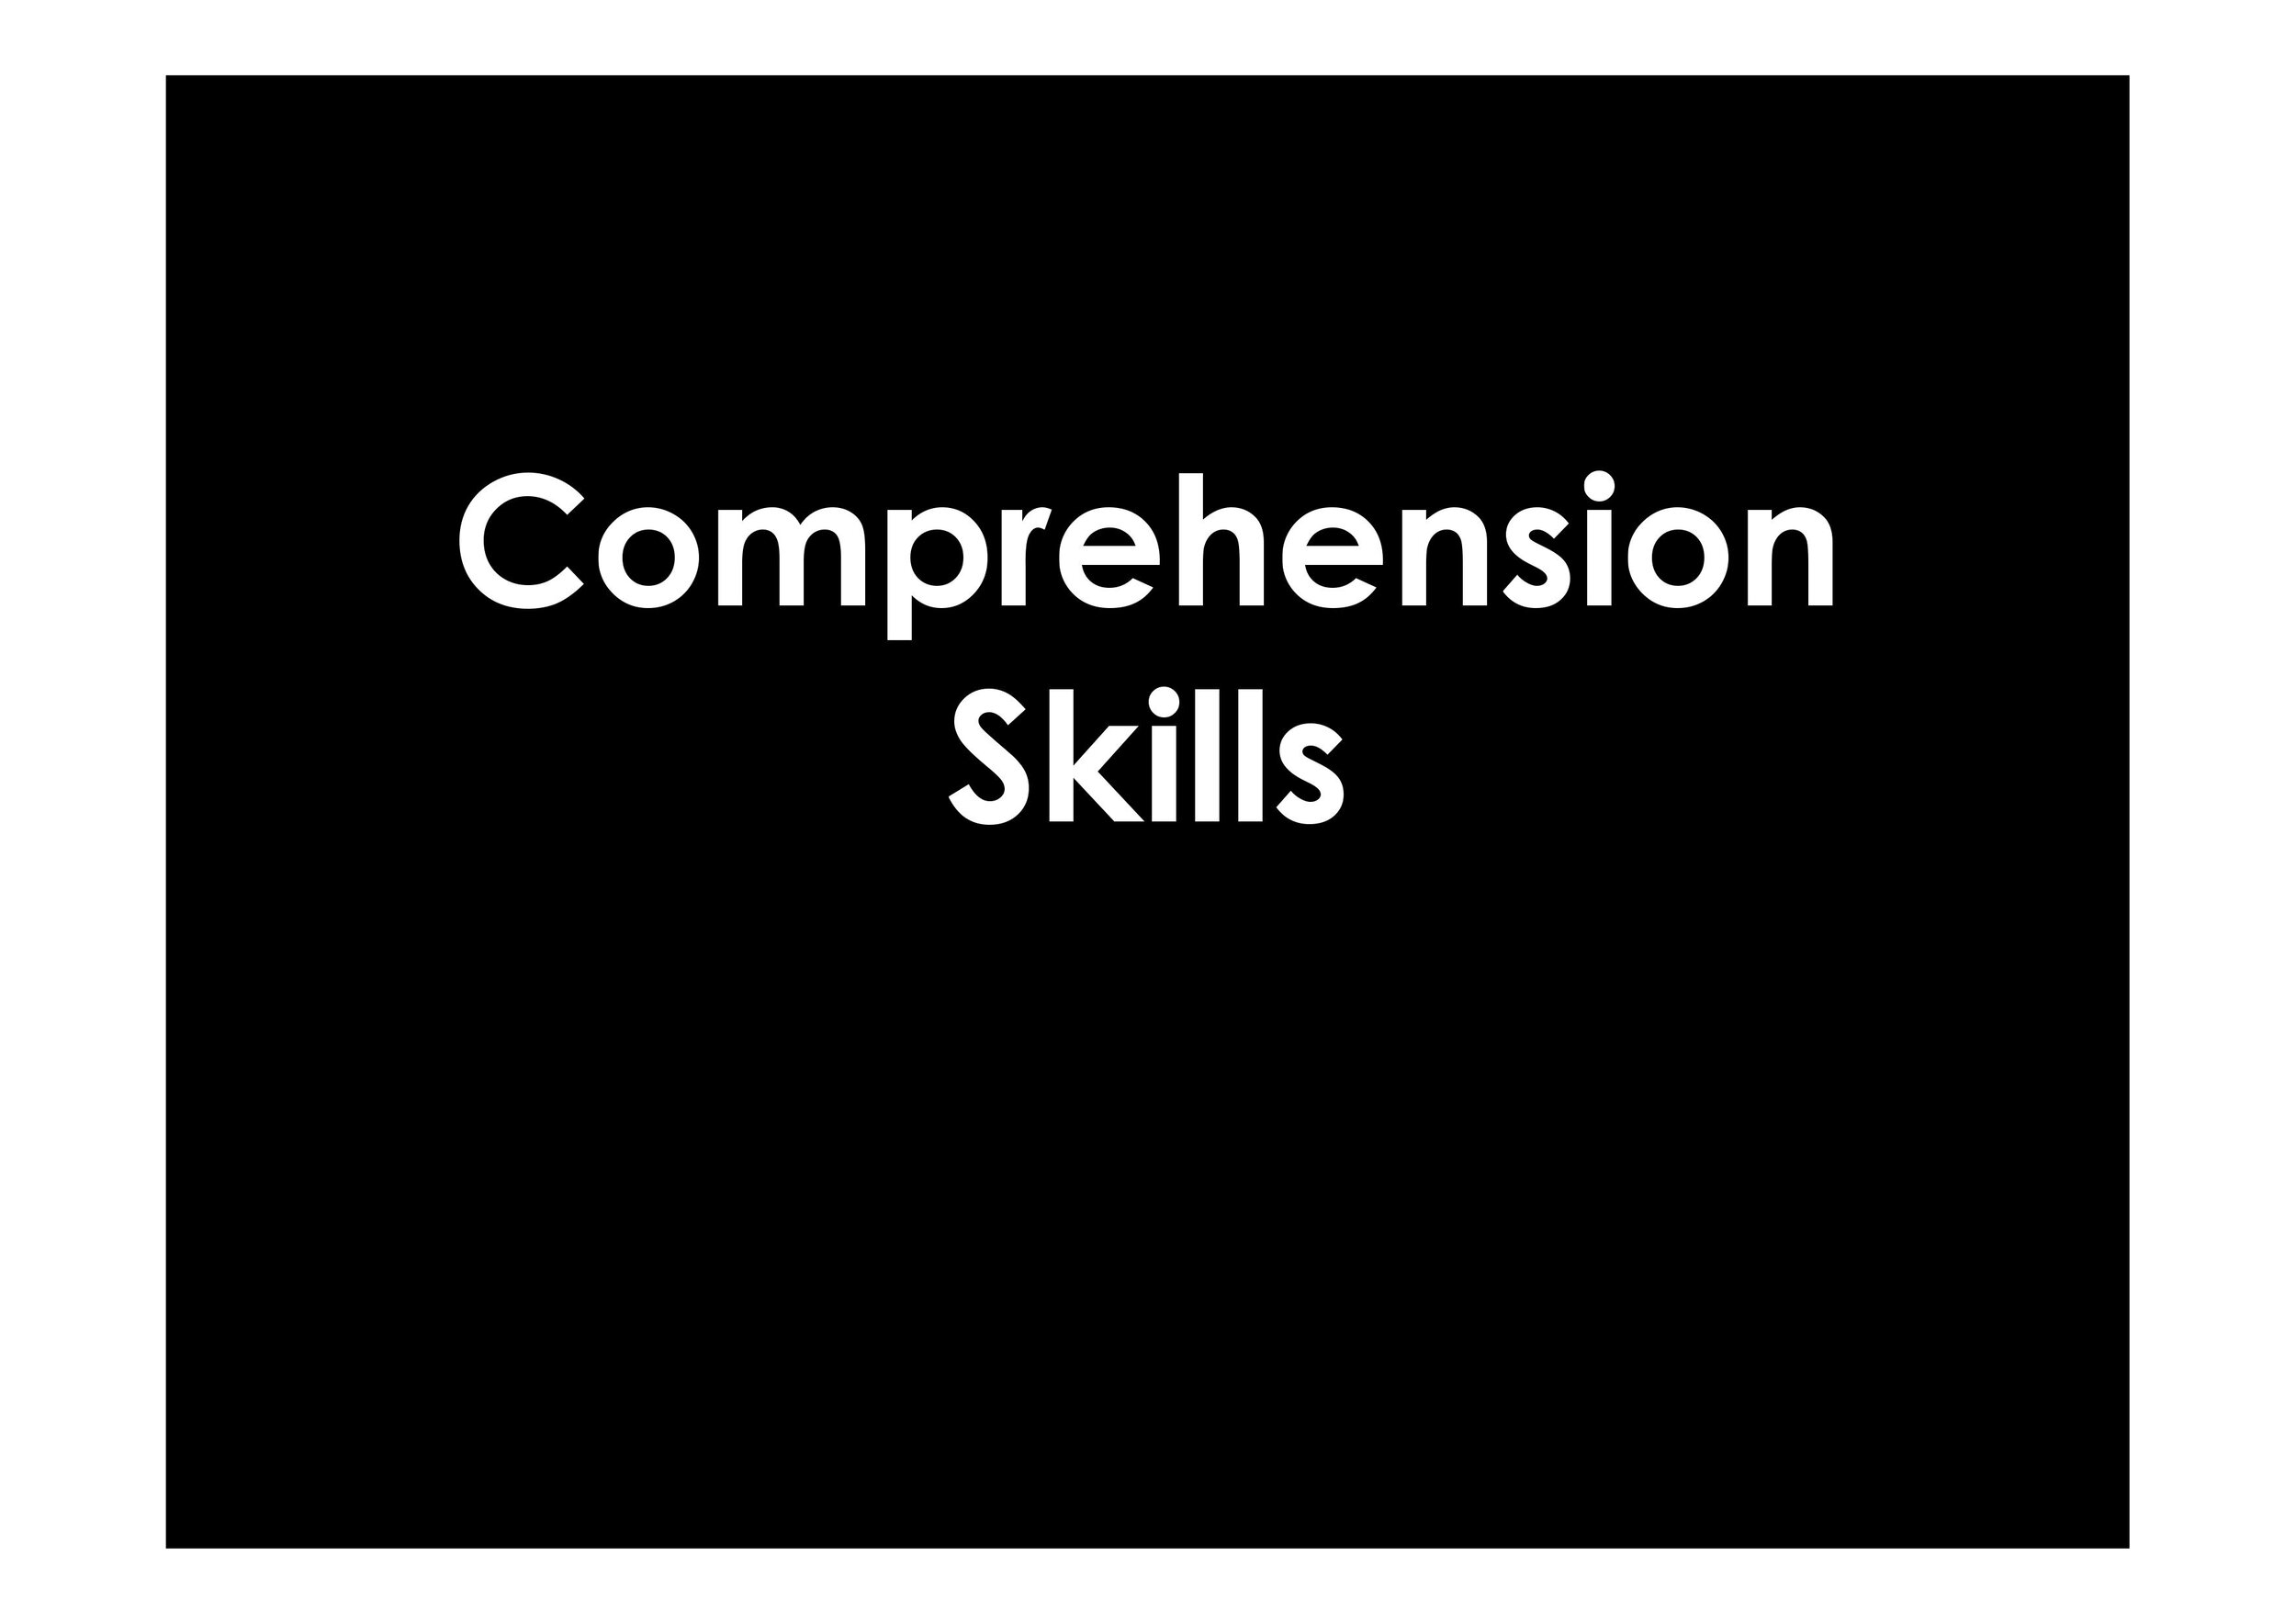  Comprehension skills – use Shakespeare-related articles 